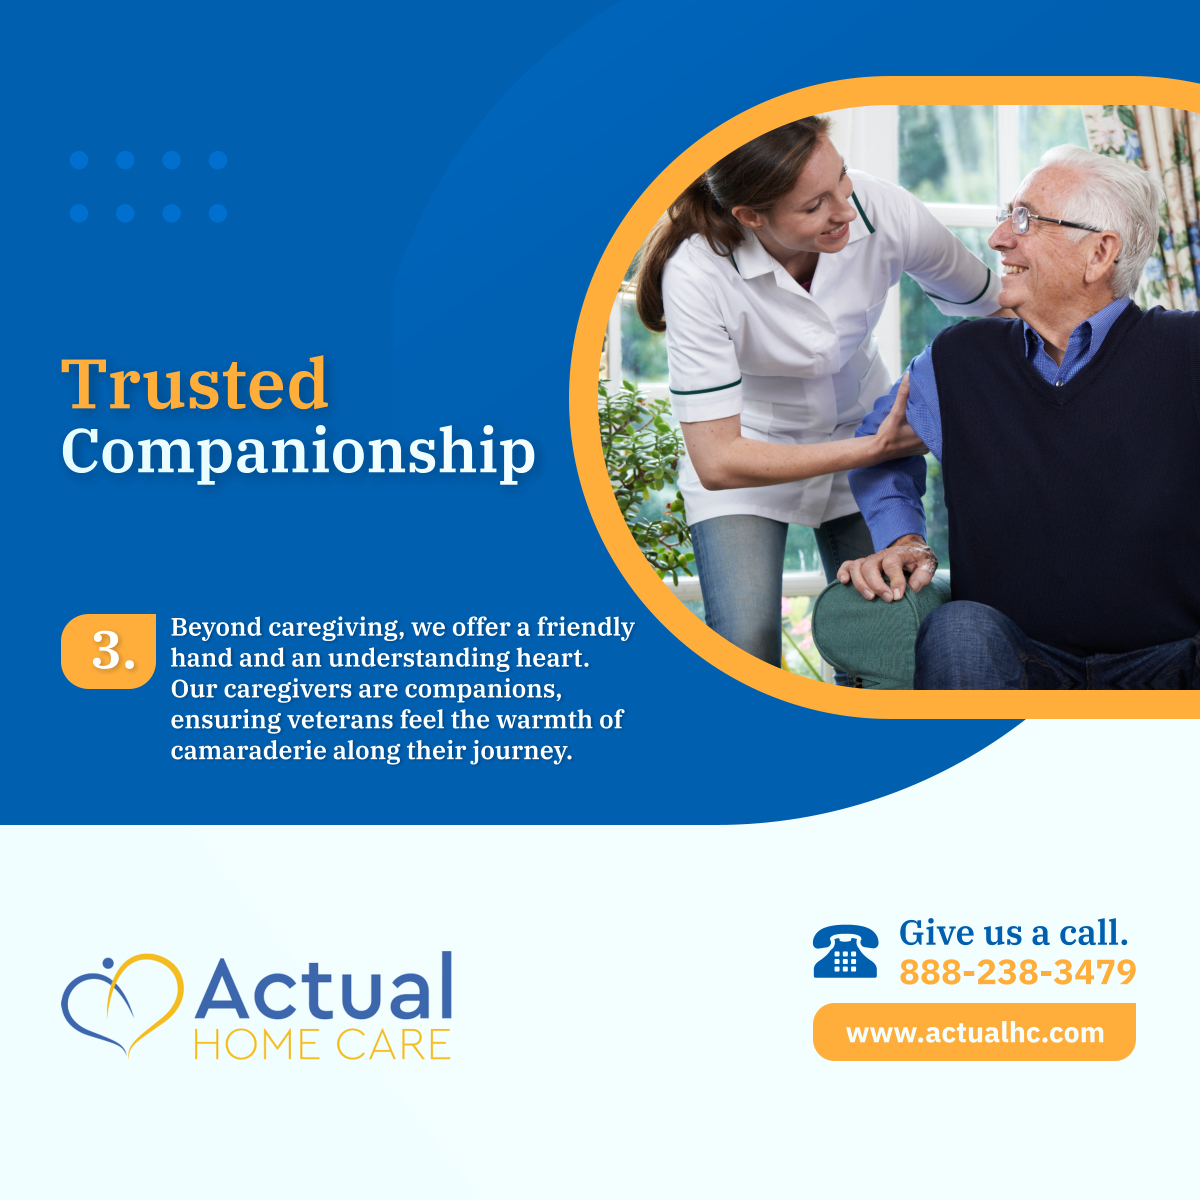 Saluting our brave veterans with more than words – we offer dedicated support that speaks volumes. From personalized care plans to trusted companionship, Actual Home Care is here for those who've served. 

#TotowaNJ #HomeCare #VeteransSupport